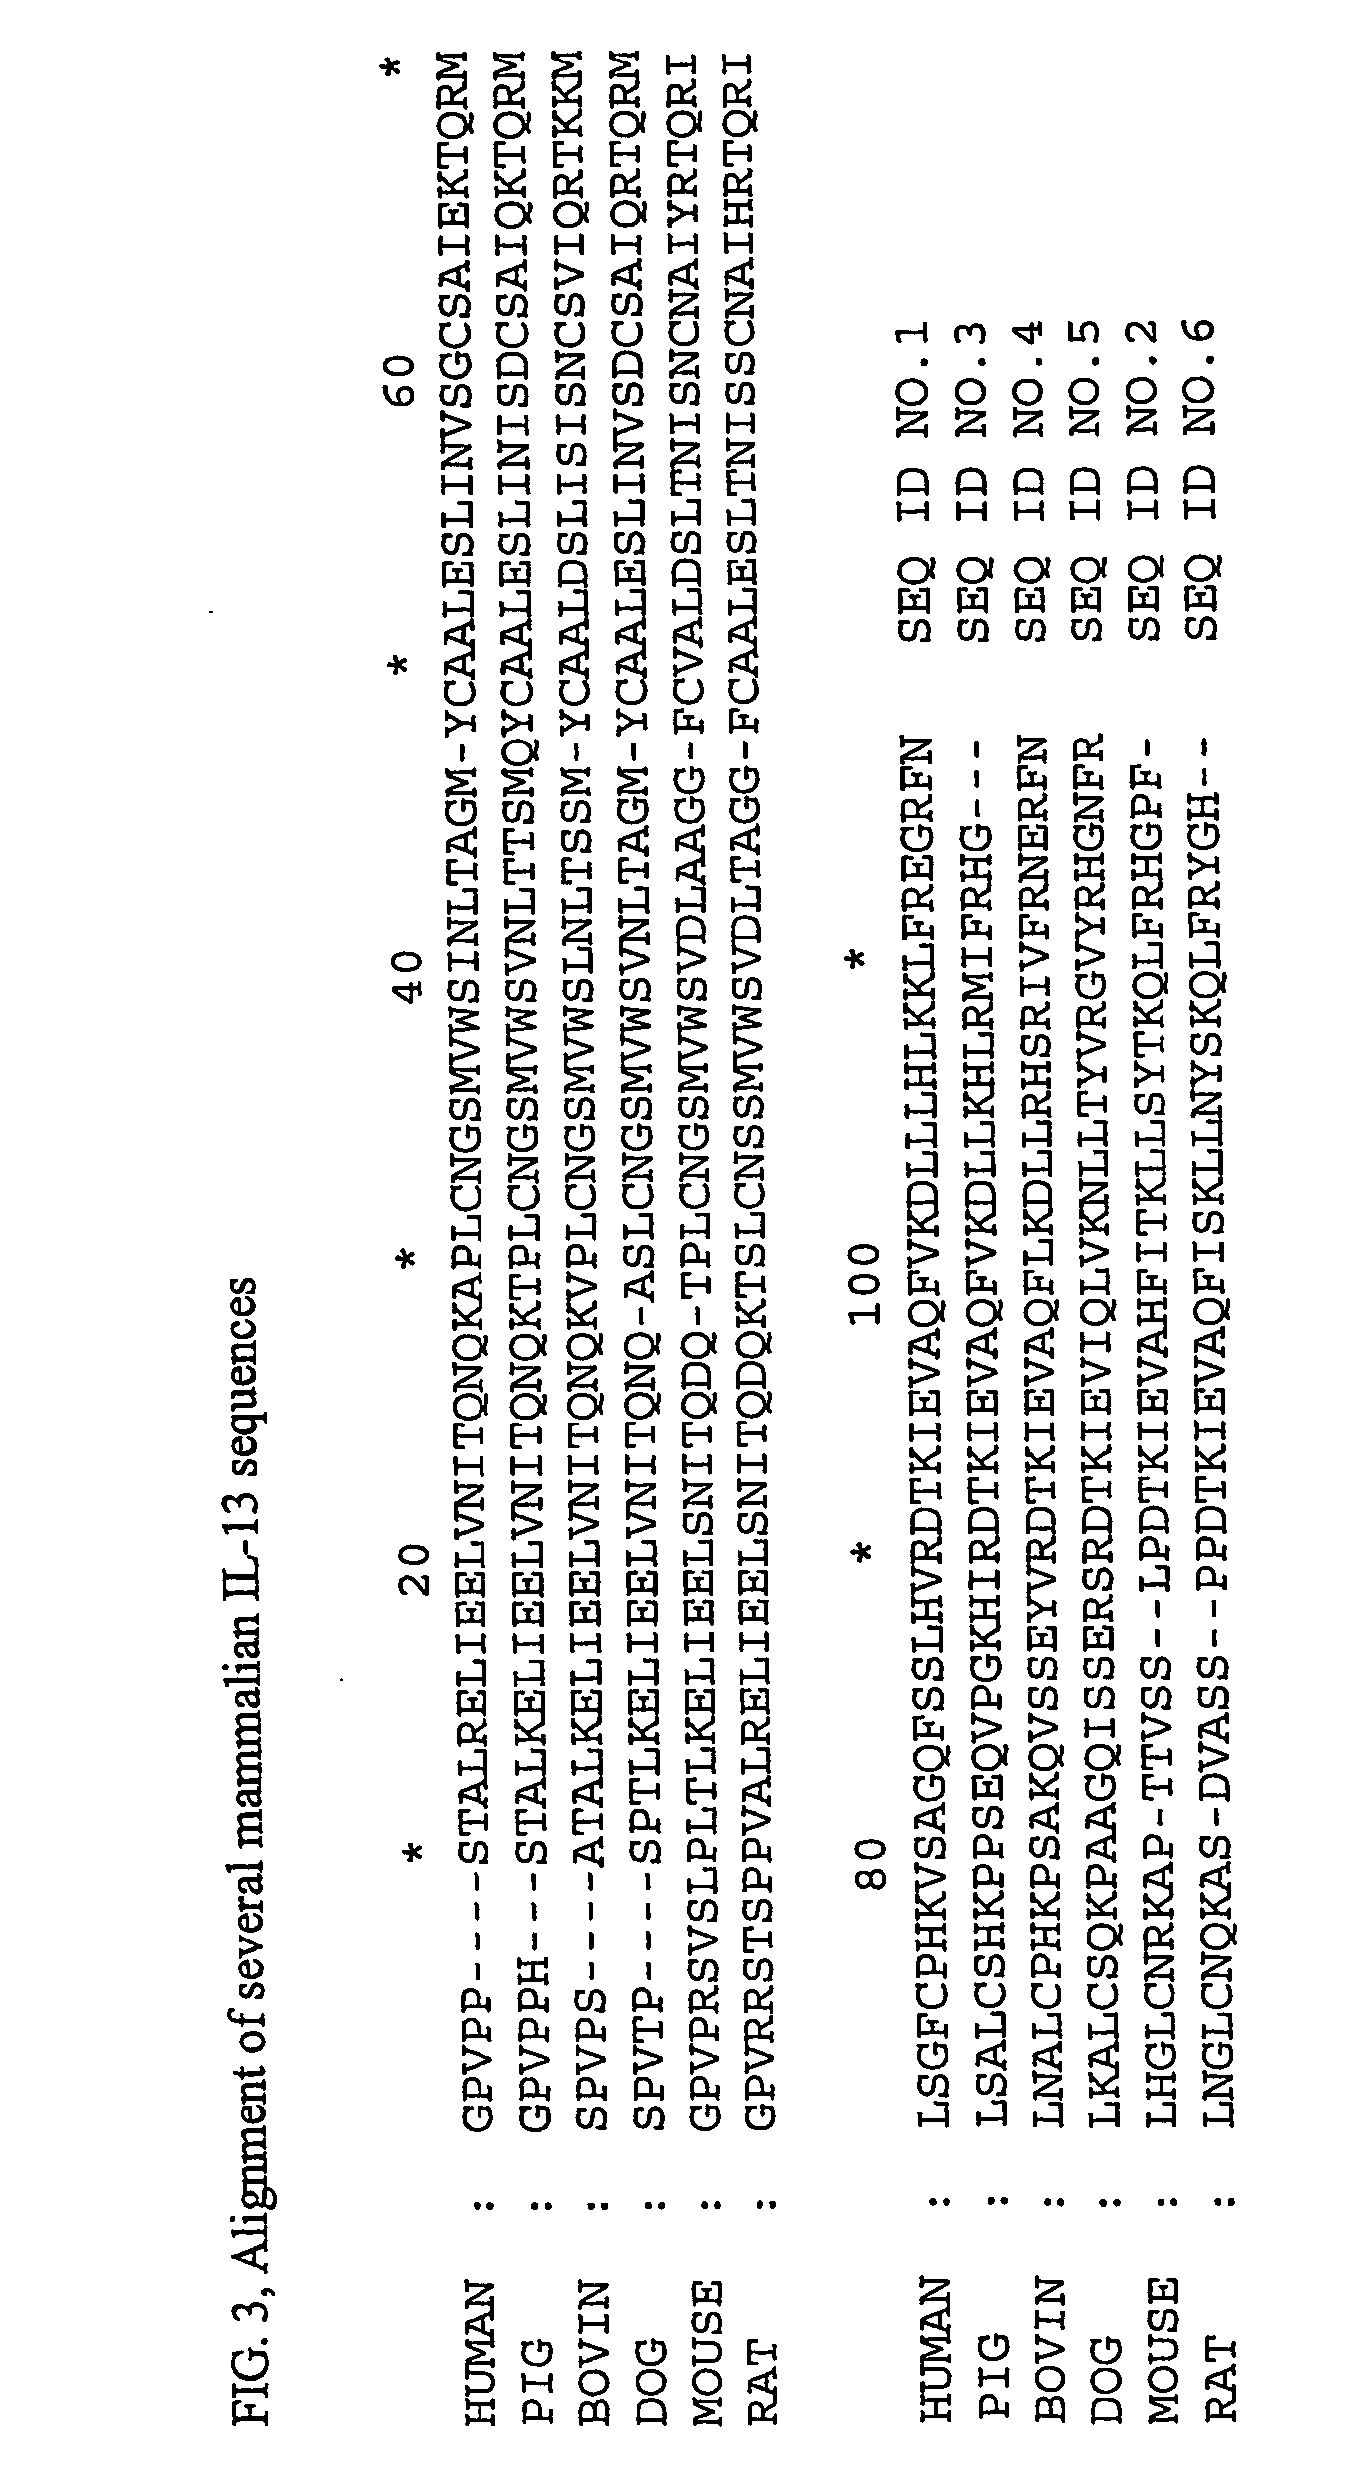 Immunogenic composition comprising an il-13 element and t cell epitopes, and its therapeutic use